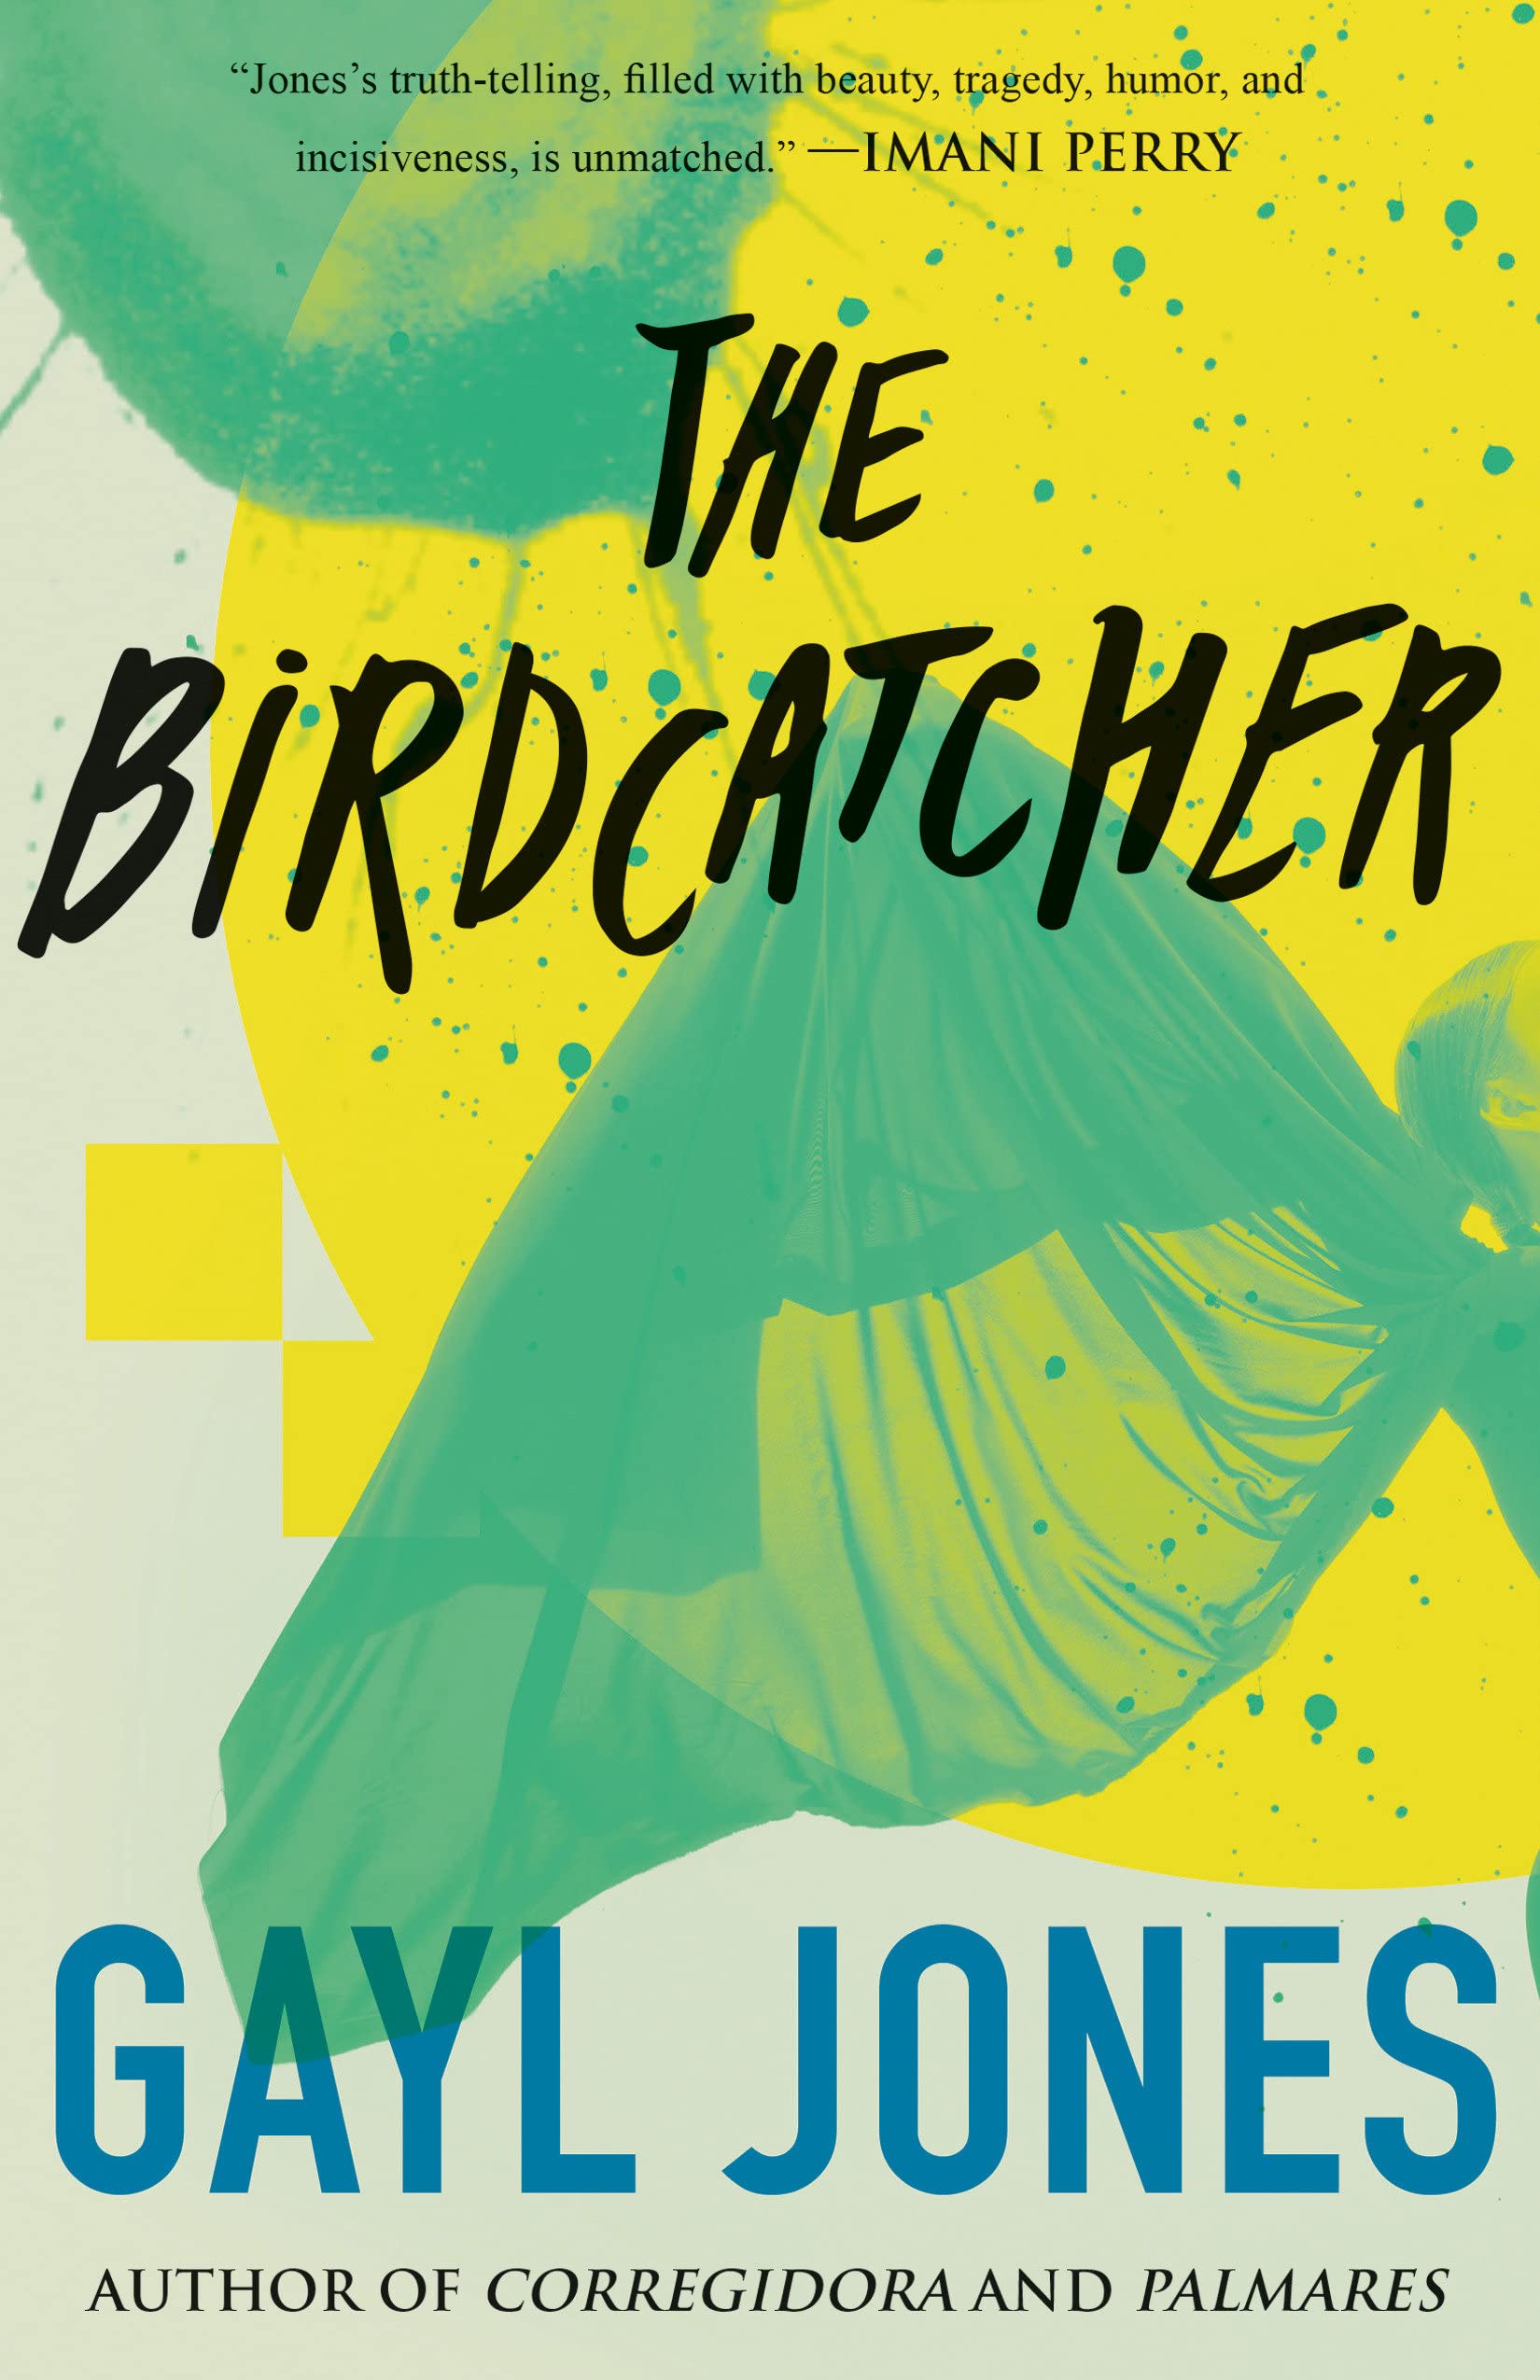 Image for "The Birdcatcher"